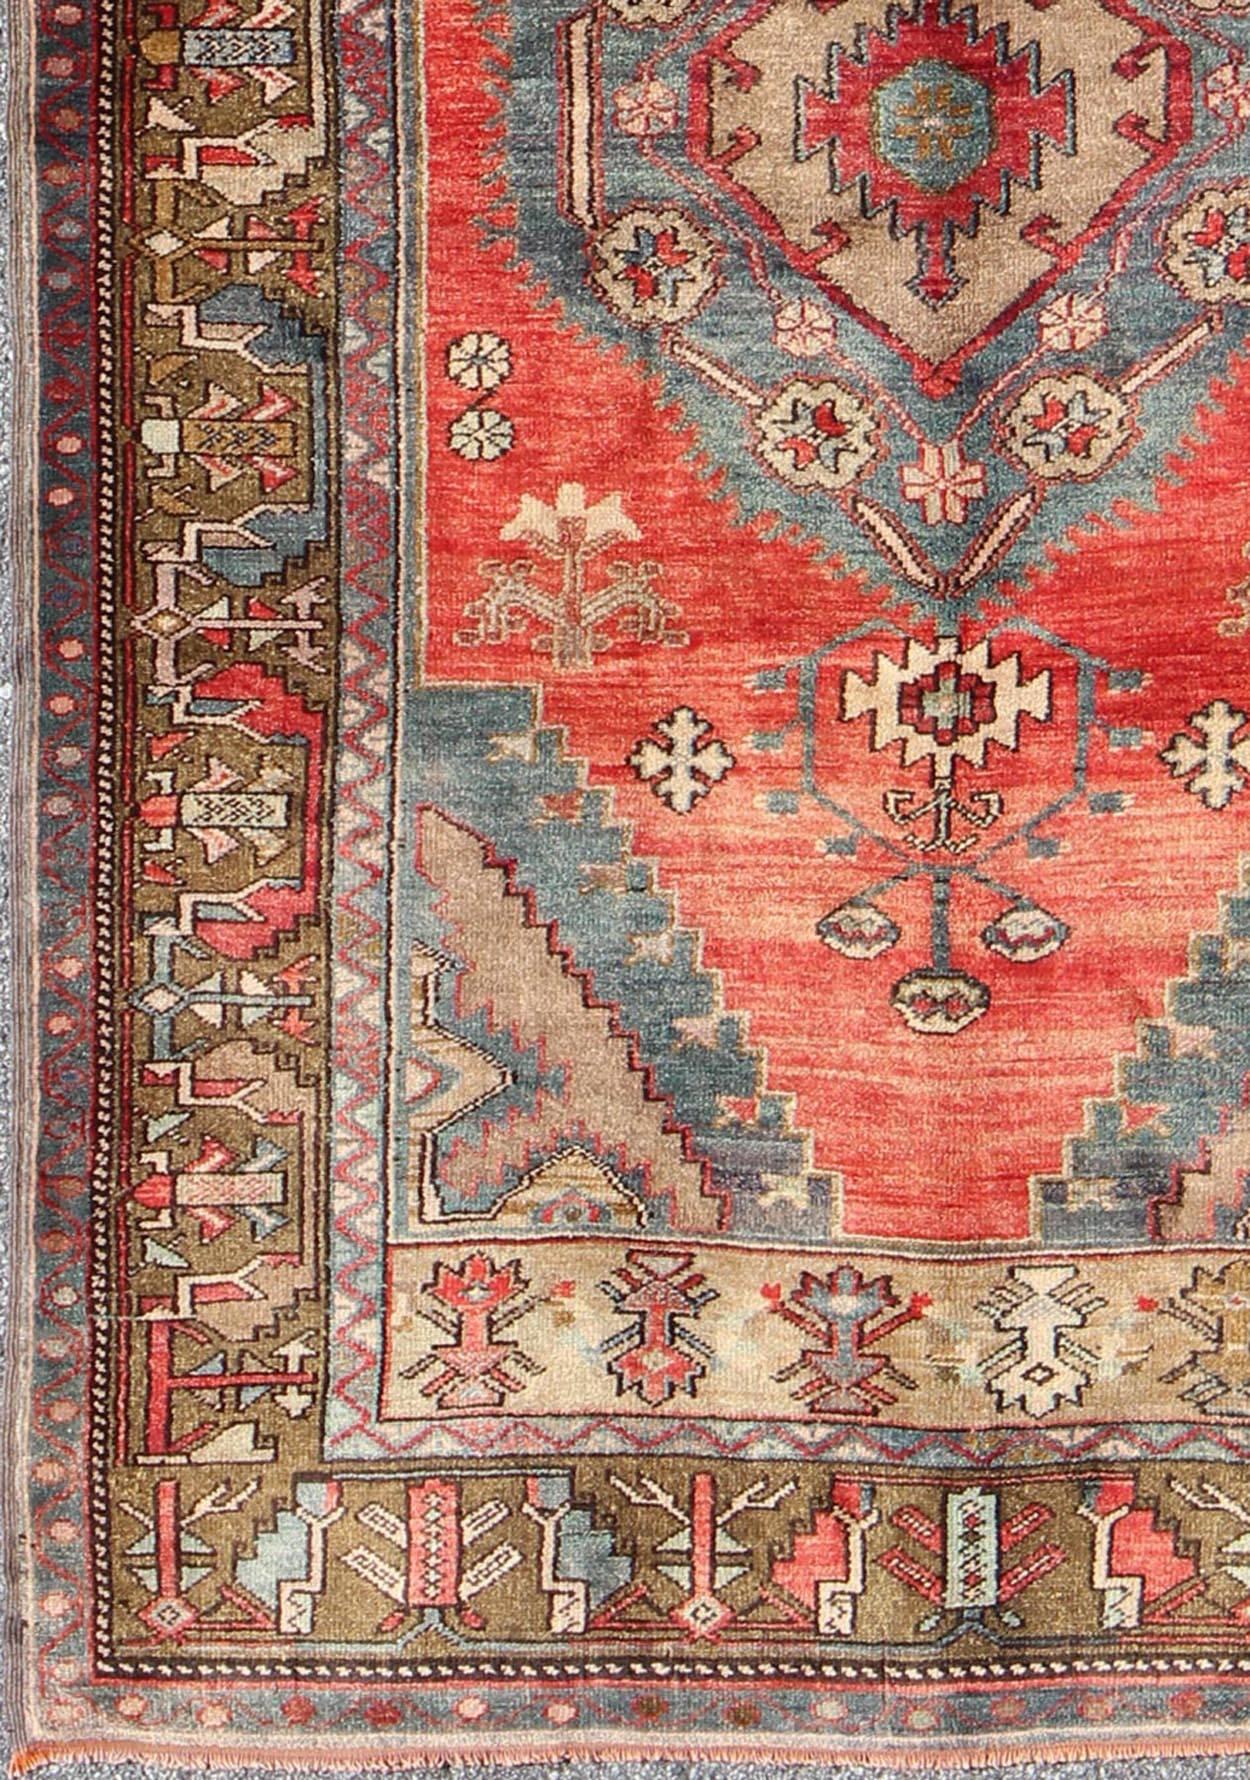 Turkish Konya Rug with Geometric Design rug/tu-sim-1
 origin/turkey 

This beautiful antique Konya carpet features a Classic medallion design. The faint red ground is home to the center medallion, which is surrounded by varying geometric tribal